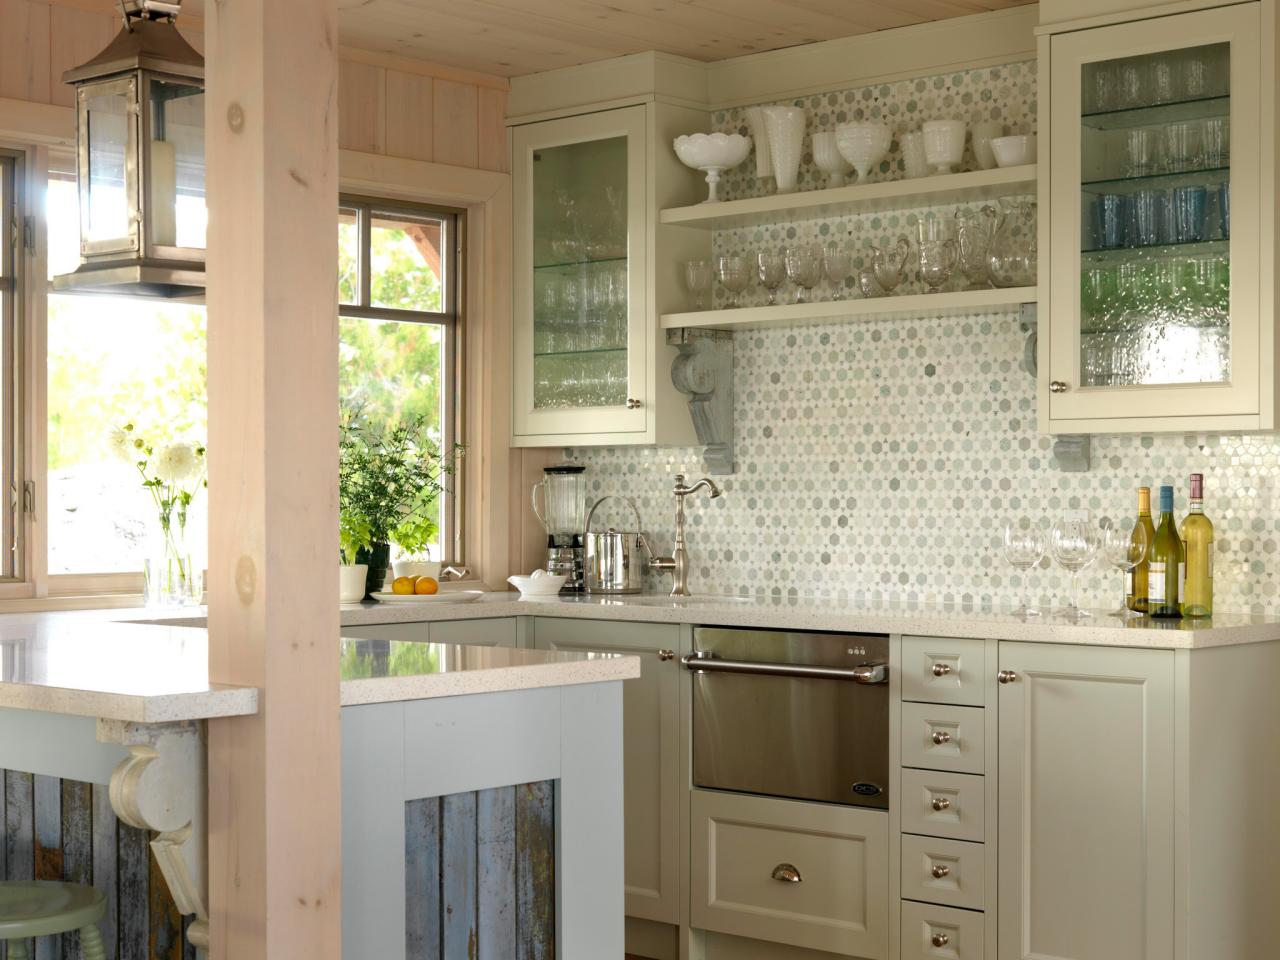 Glass Kitchen Cabinet Doors: Pictures & Ideas From HGTV | HGTV